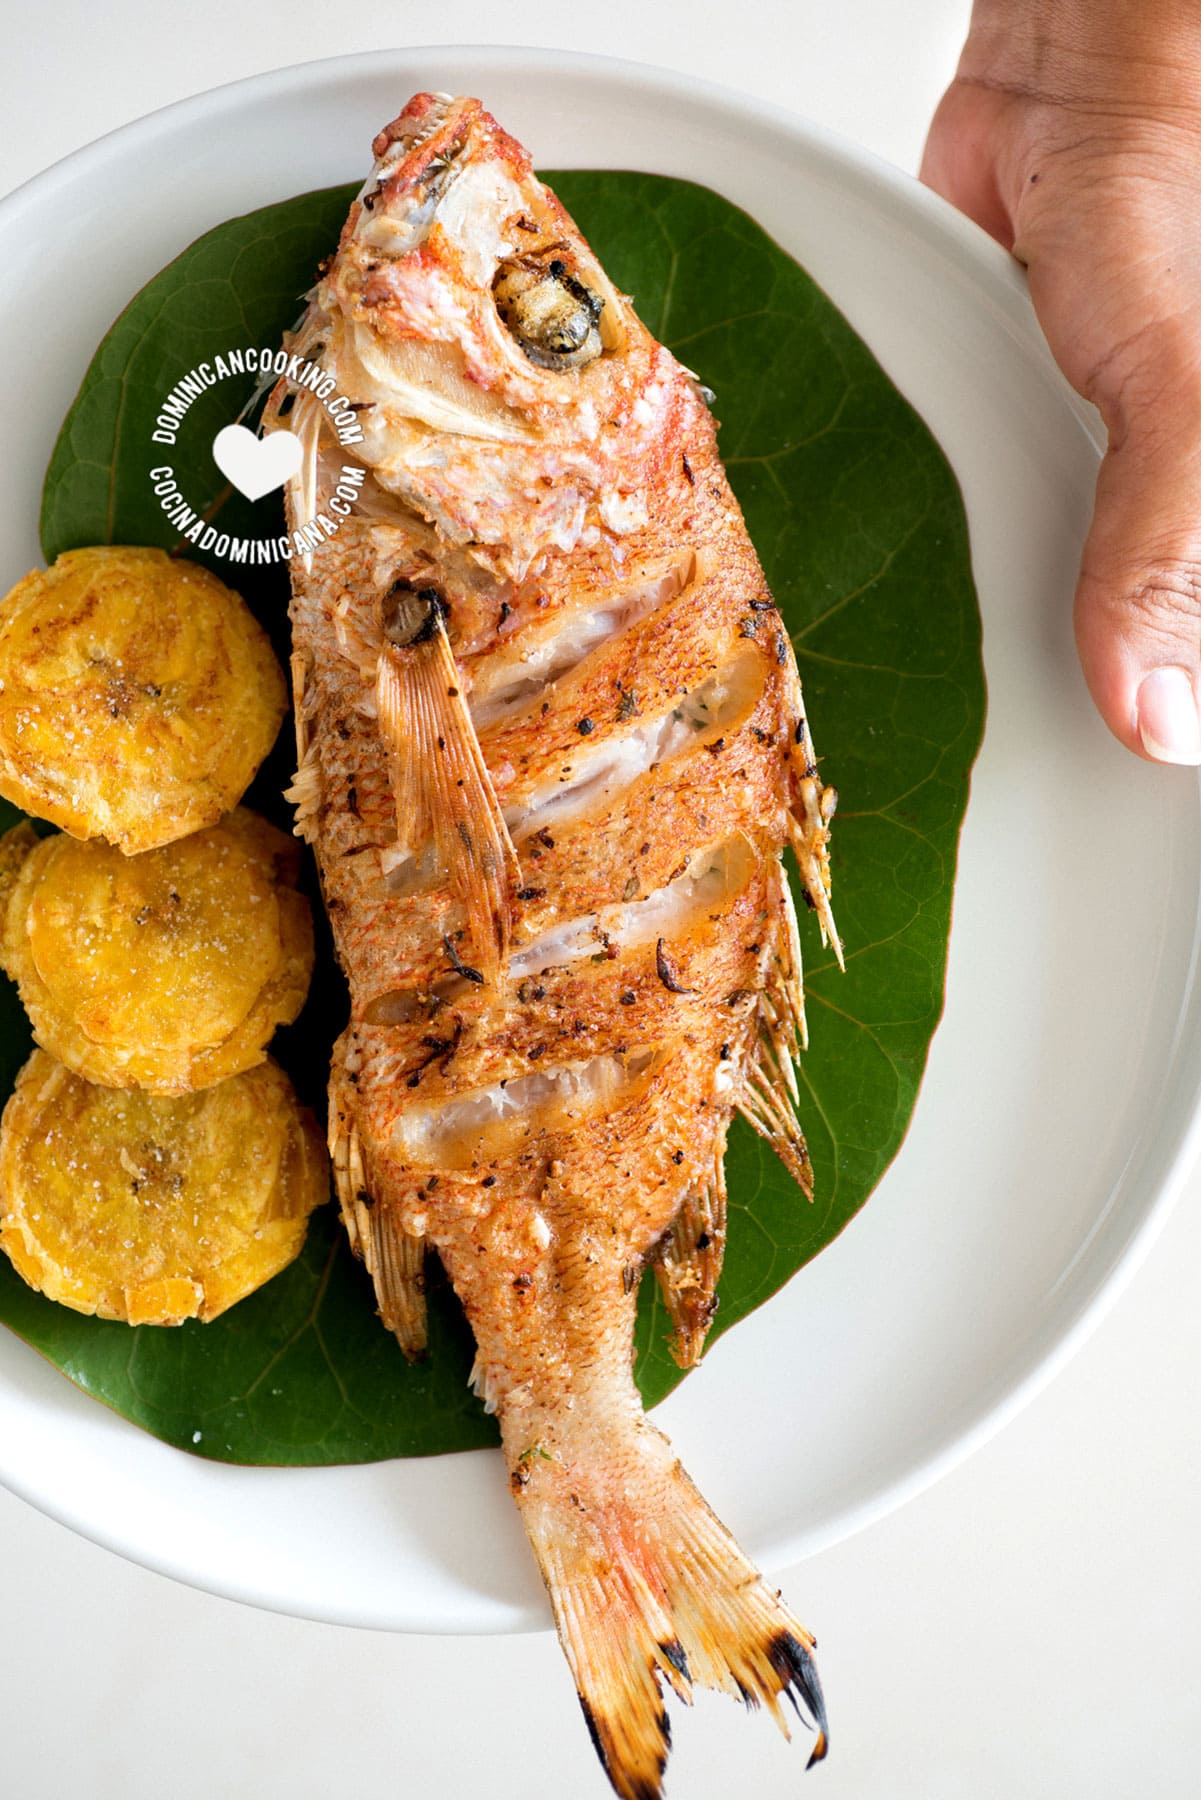 Pescado frito (fried fish) on plate held by hand.